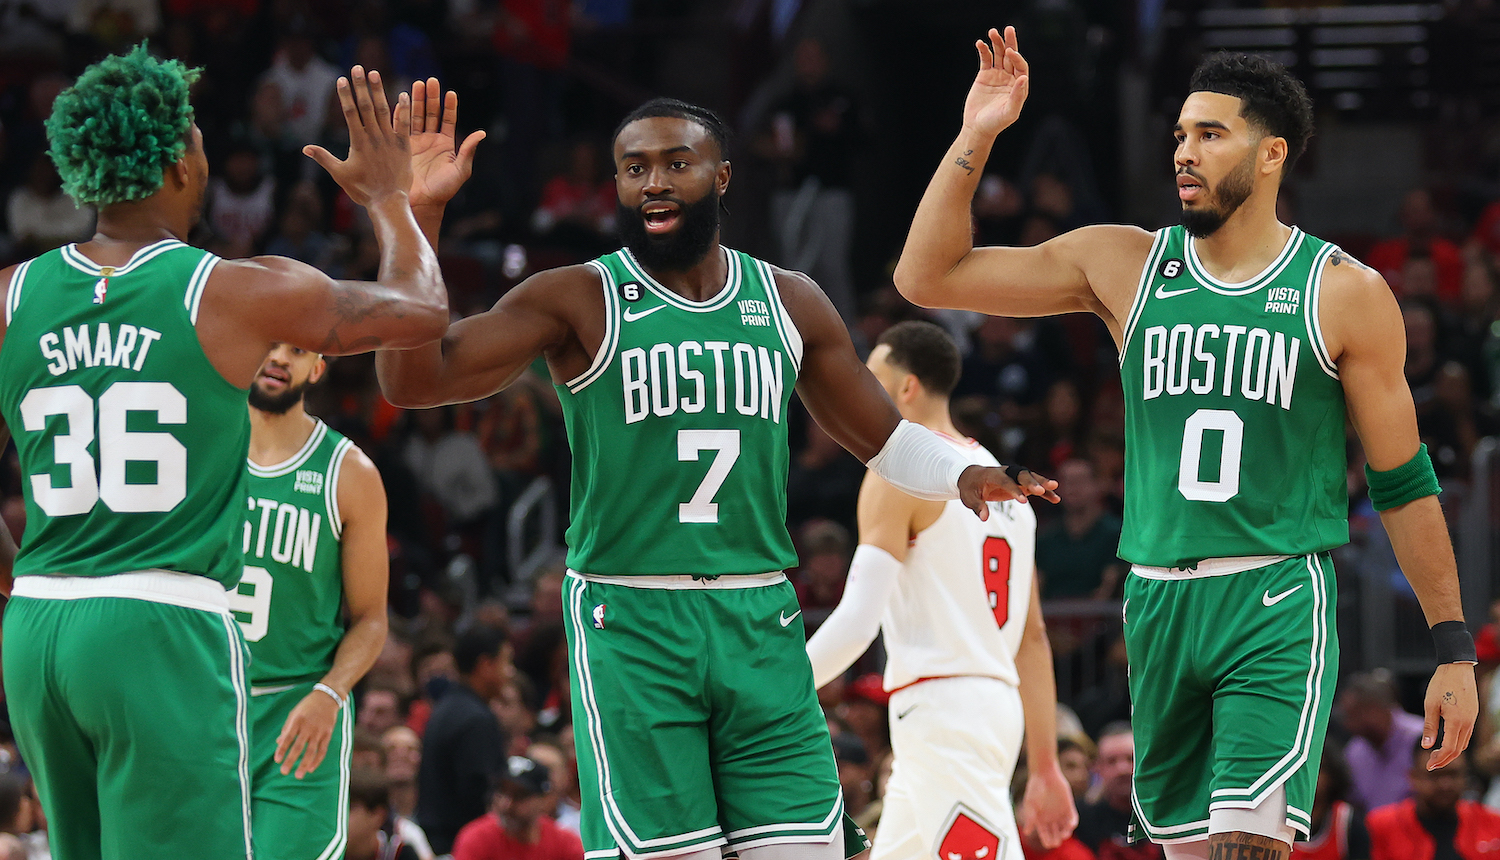 CHICAGO, ILLINOIS - OCTOBER 24: Marcus Smart #36, Jaylen Brown #7 and Jayson Tatum #0 of the Boston Celtics celebrate against the Chicago Bulls during the first half at United Center on October 24, 2022 in Chicago, Illinois. NOTE TO USER: User expressly acknowledges and agrees that, by downloading and or using this photograph, User is consenting to the terms and conditions of the Getty Images License Agreement. (Photo by Michael Reaves/Getty Images)